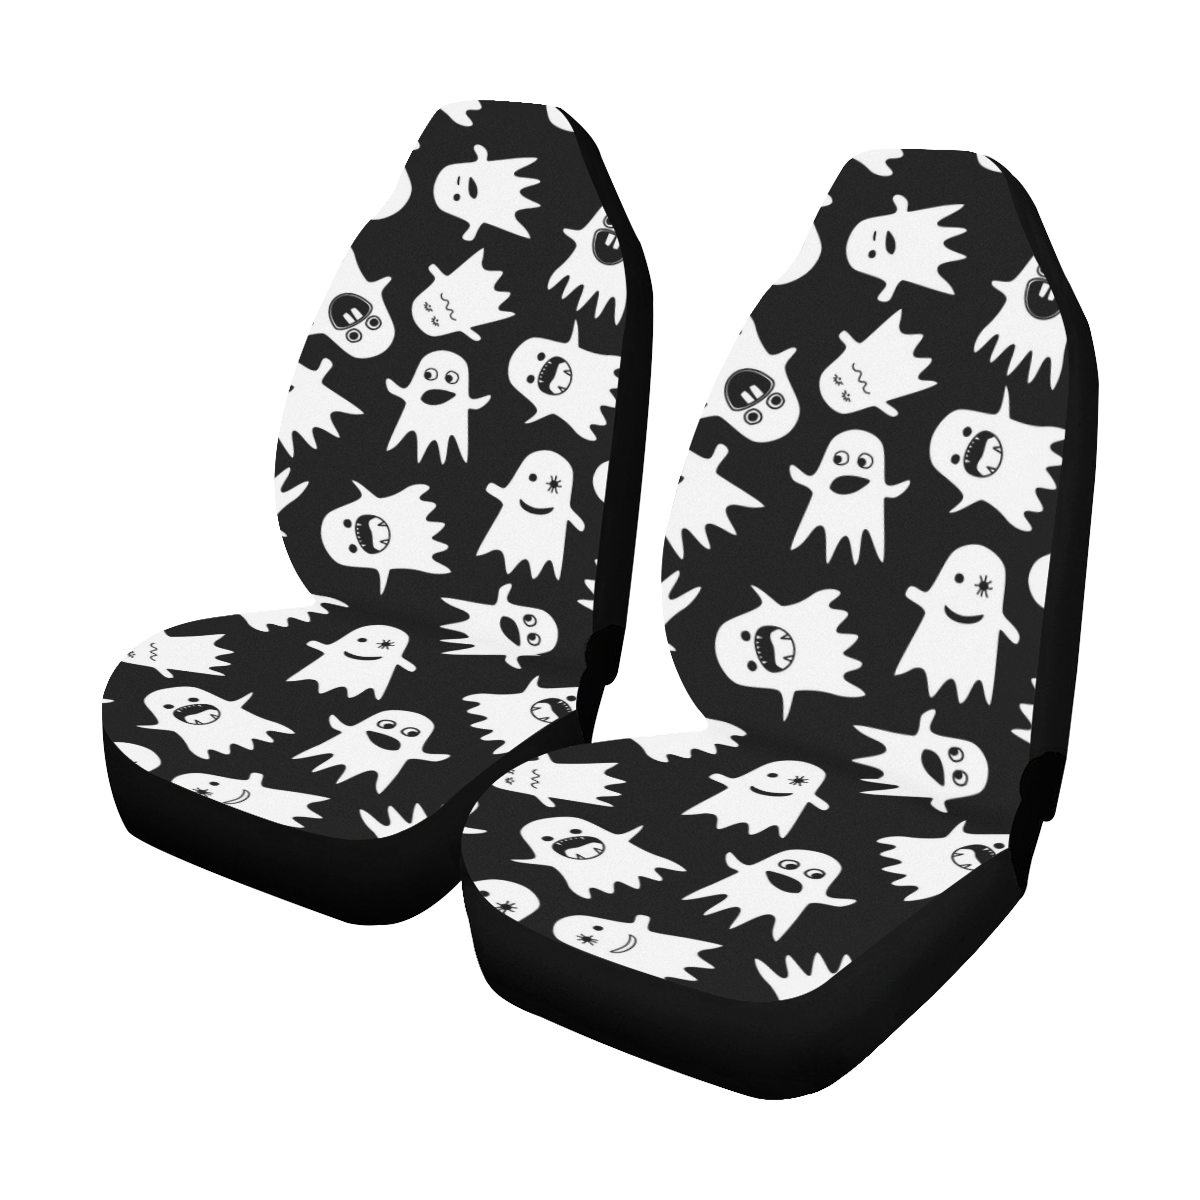 Halloween Ghosts Car Seat Covers (Set of 2)